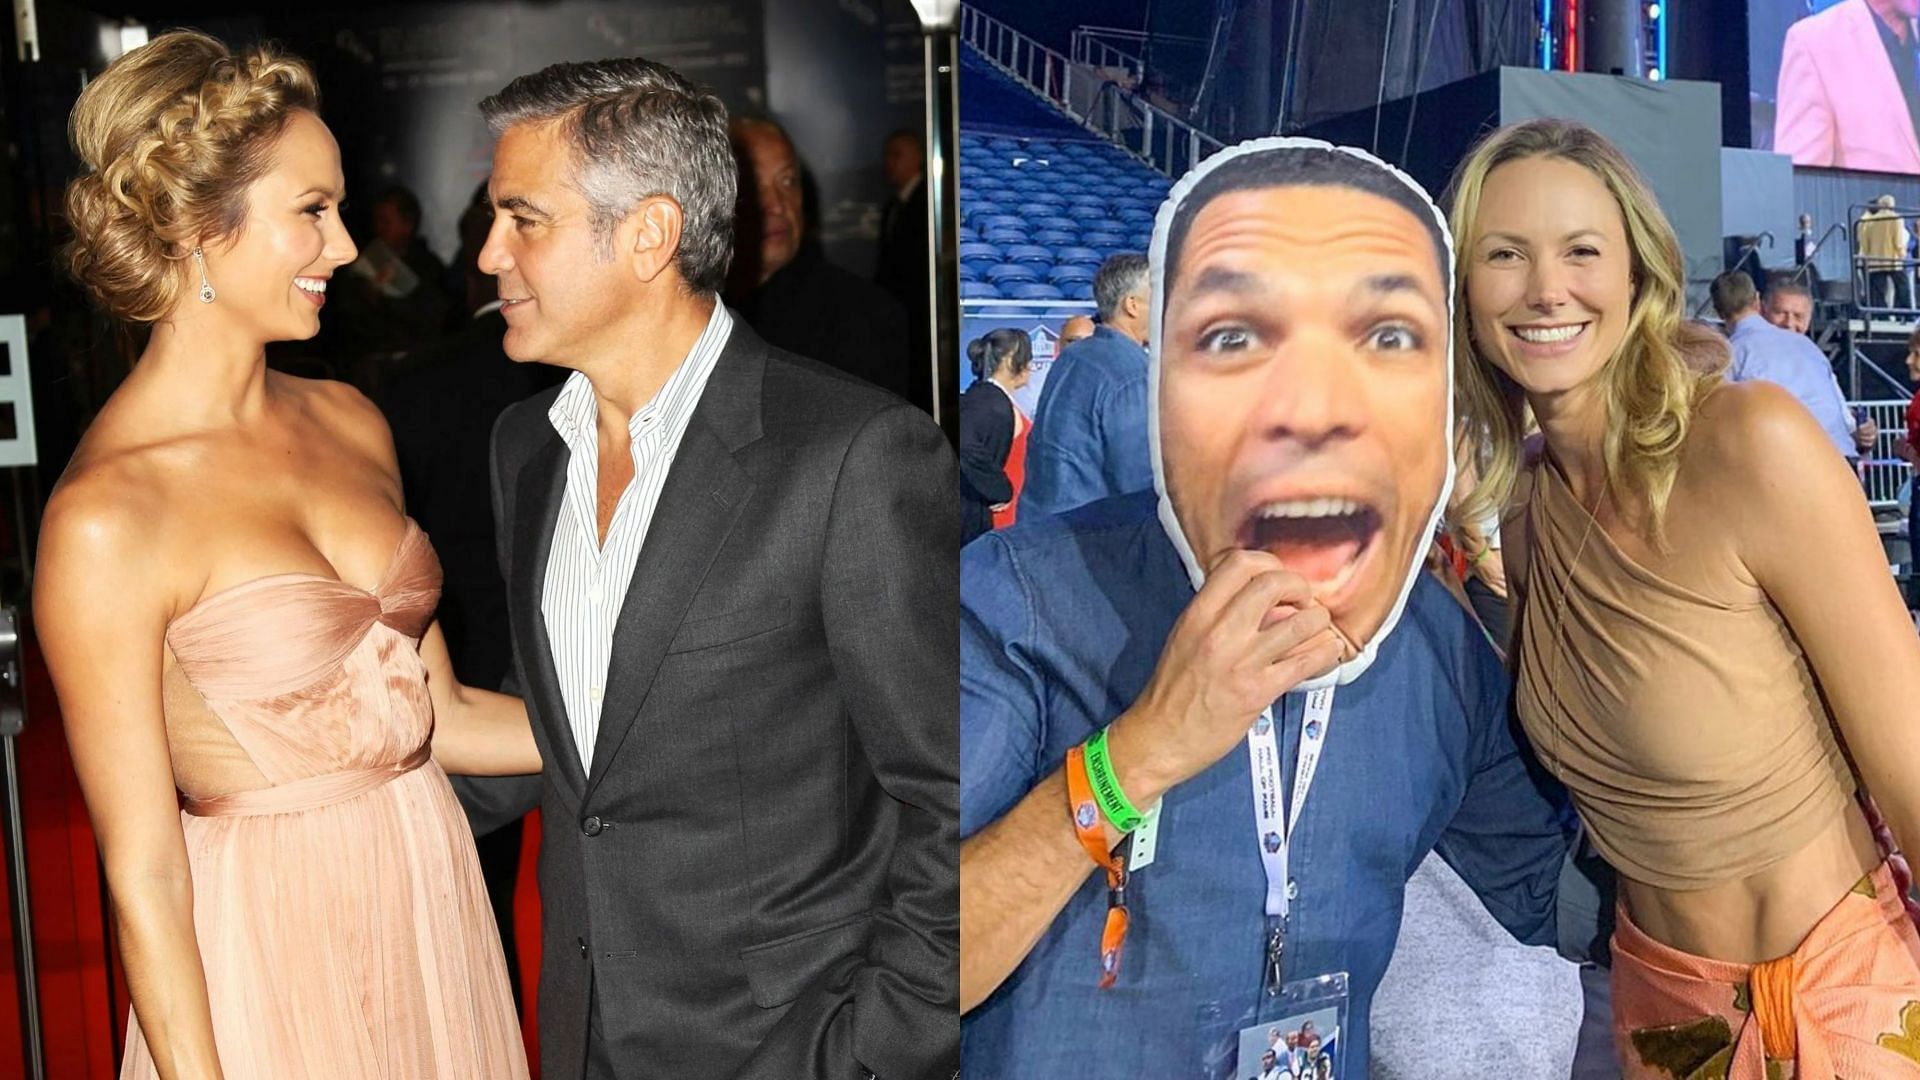 Stacy Keibler with George Clooney (left) and with Jared Pobre (right)